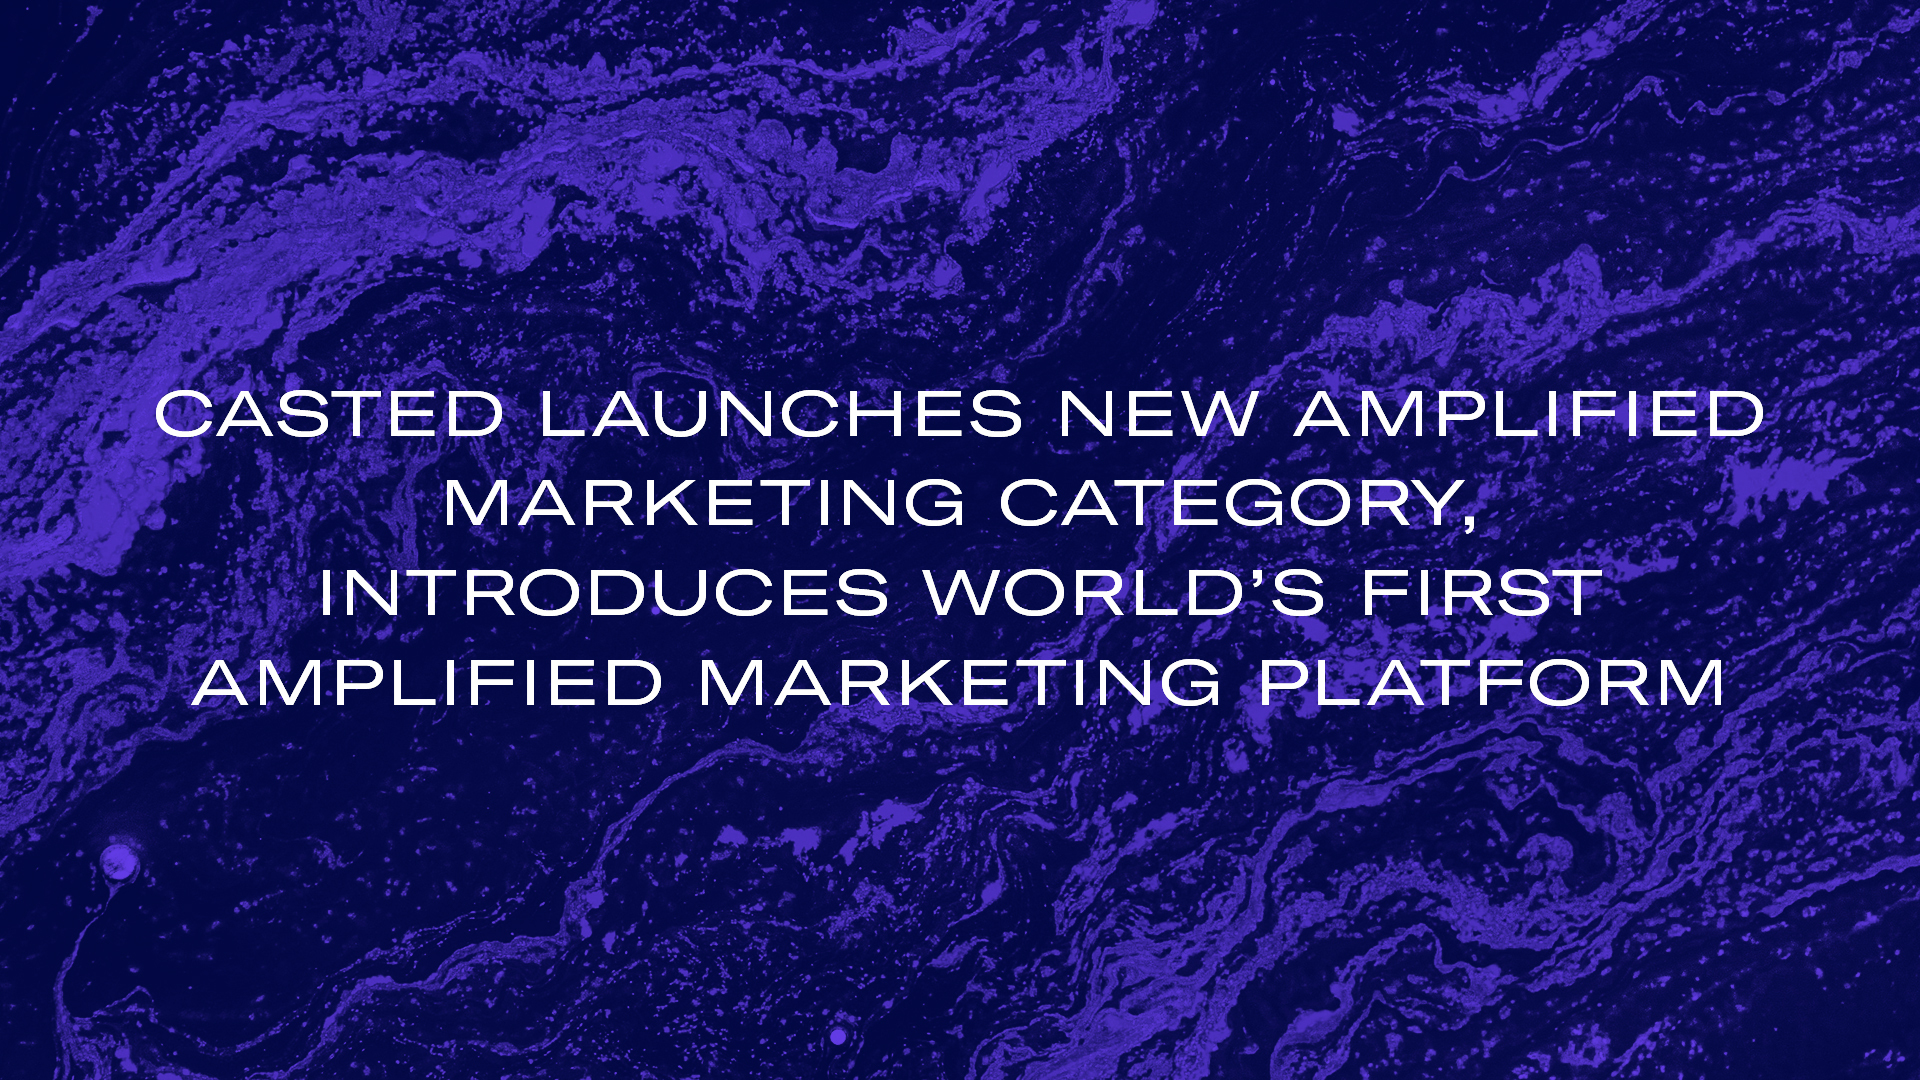 Casted Launches New Amplified Marketing Category, Introduces World’s First Amplified Marketing Platform